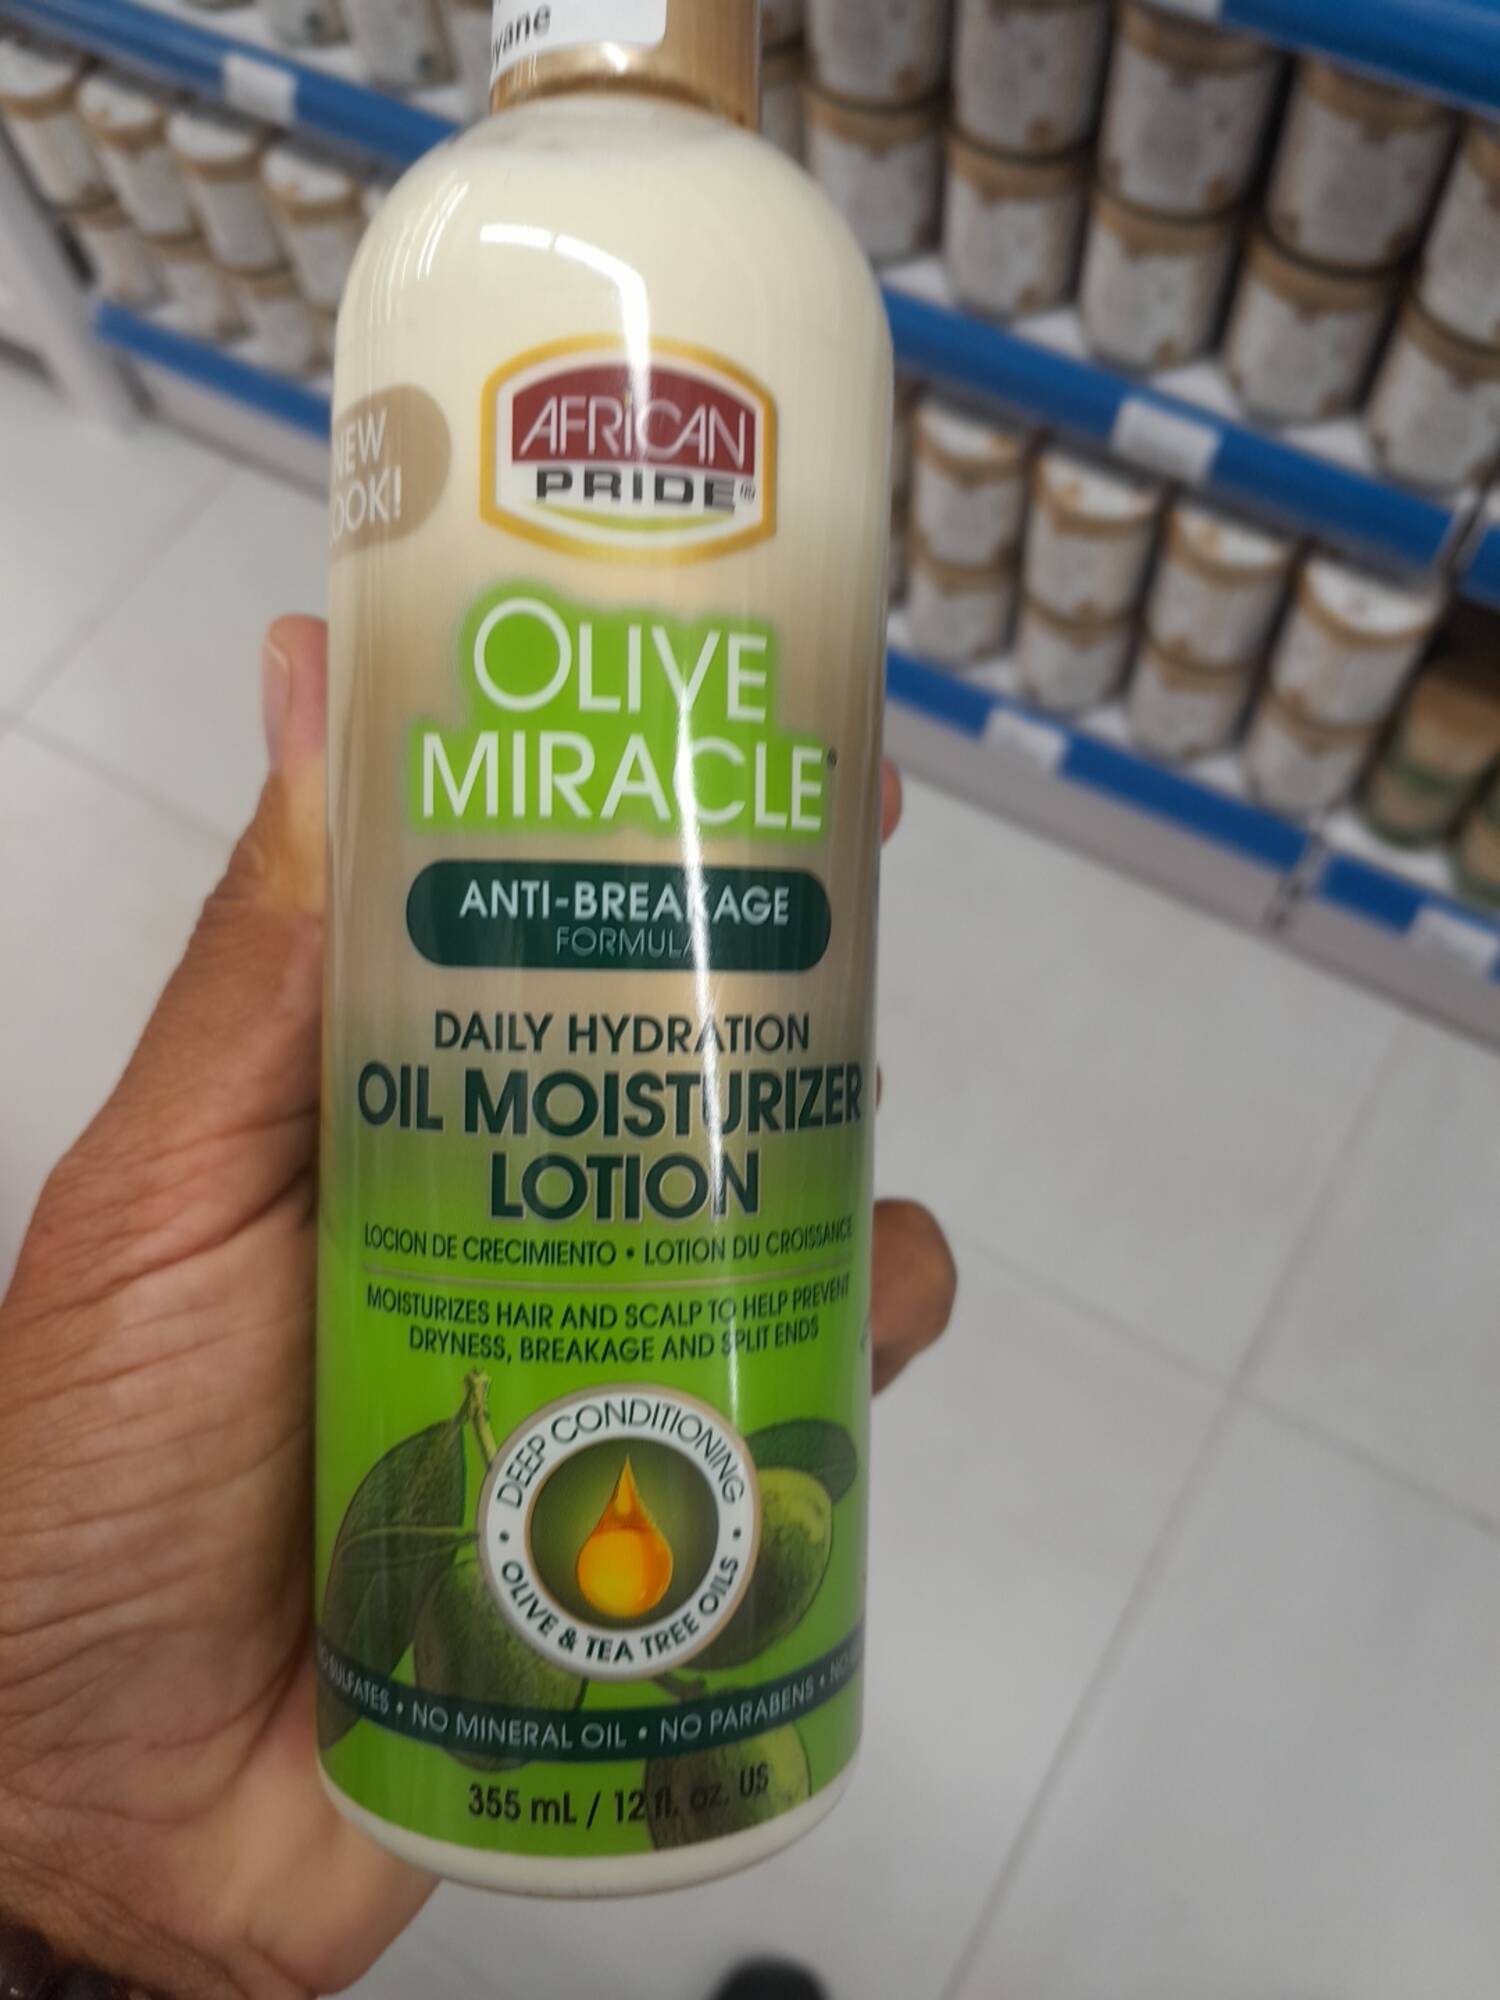 AFRICAN PRIDE - Olive miracle - Oil moisturizer lotion